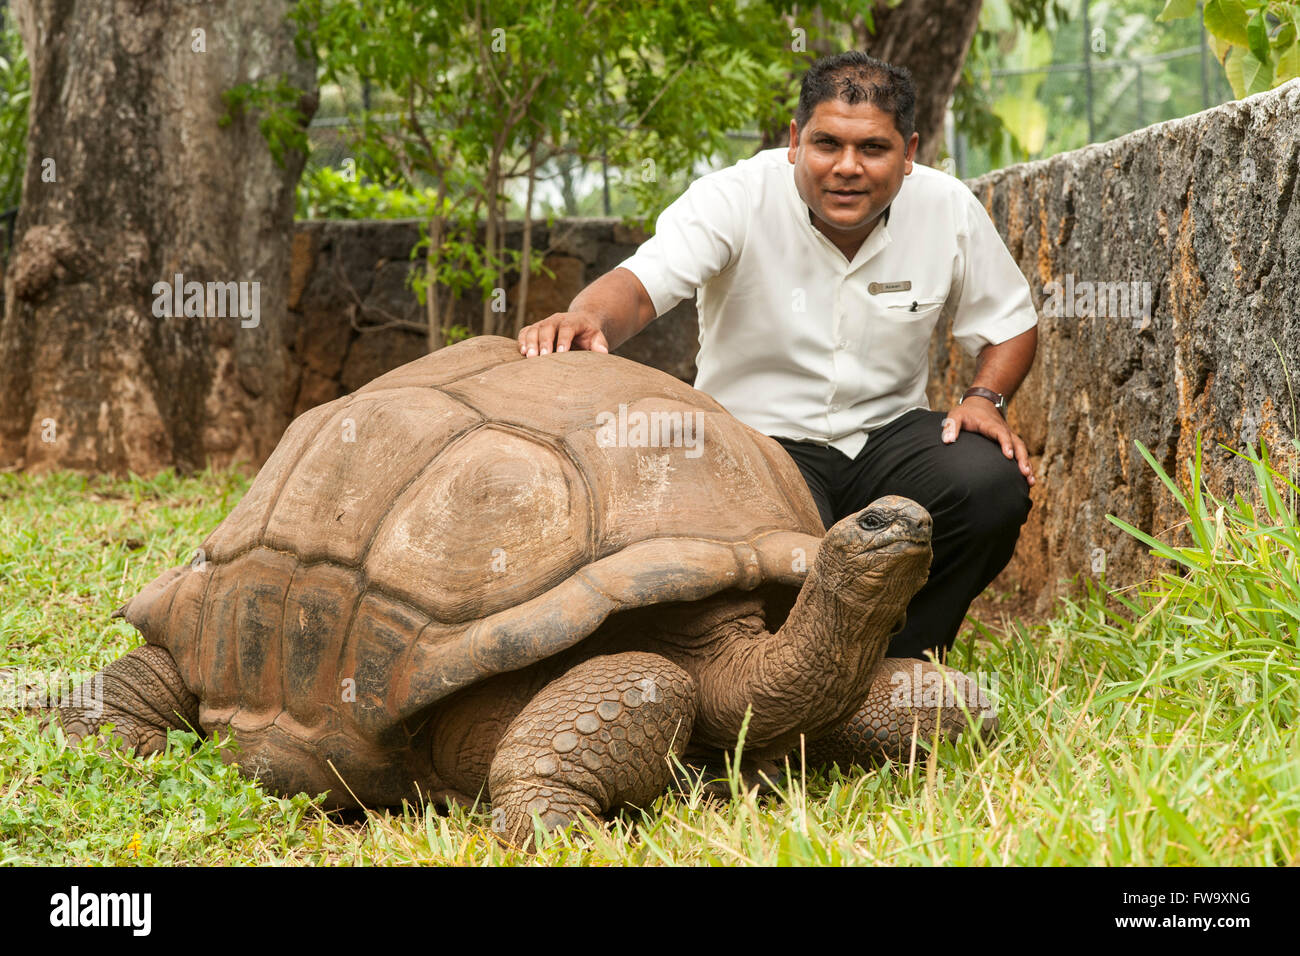 Giant tortoise and staff member at the Four Seasons Hotel in Mauritius. Stock Photo